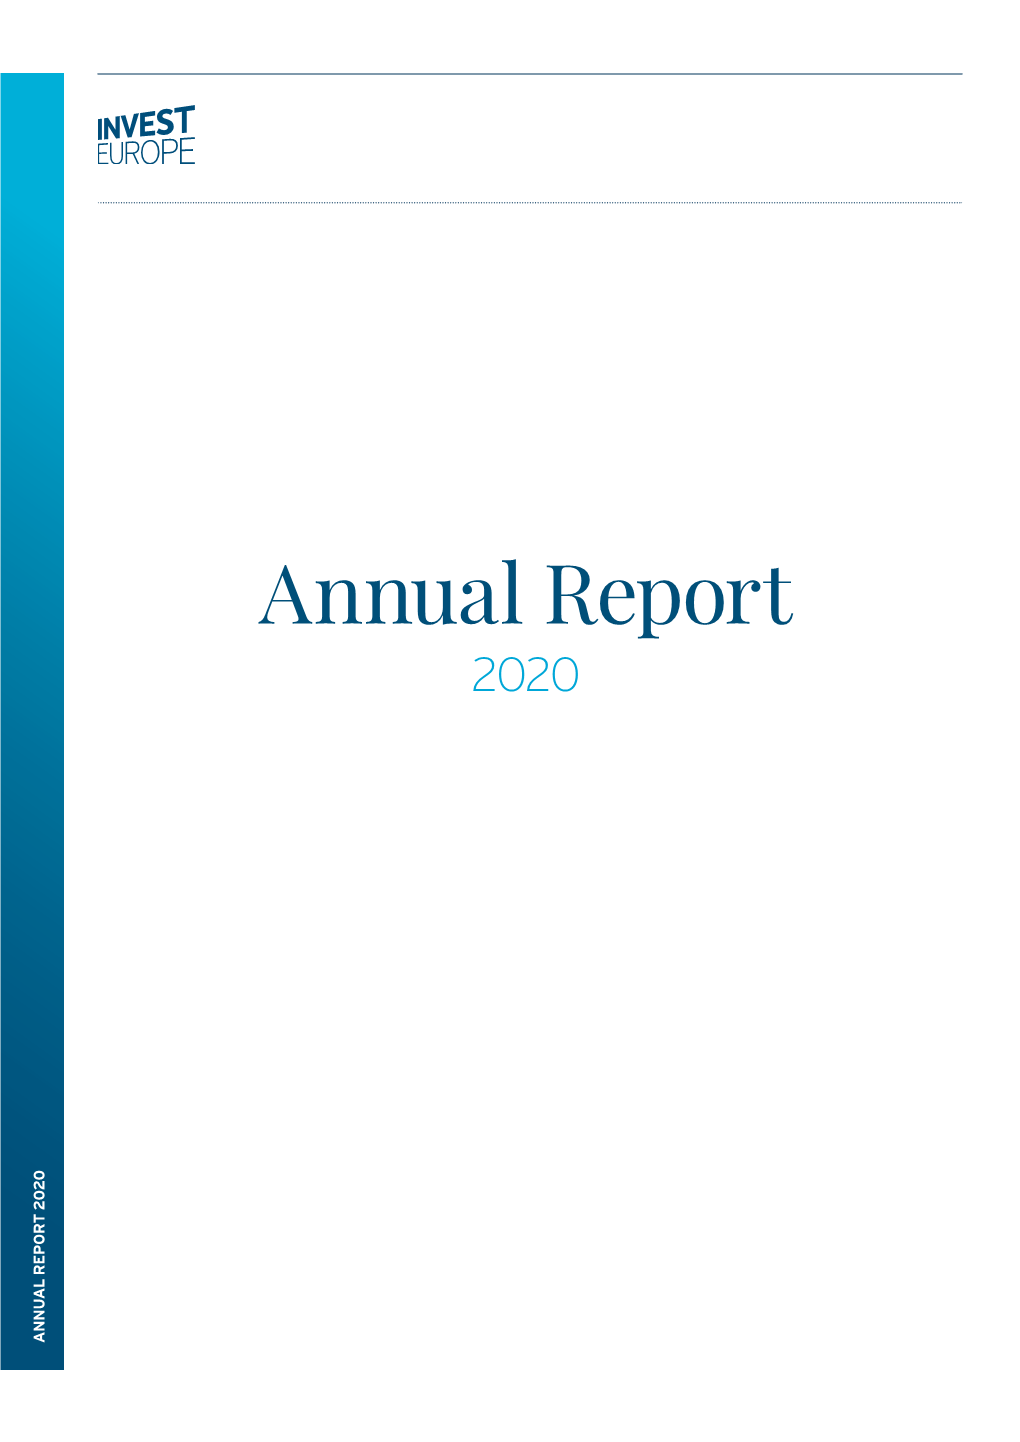 ANNUAL REPORT 2020 Annual Report Annual 2020 Invest Europe Annual Report 2020 Overview How We Operate What We Do Financials 01